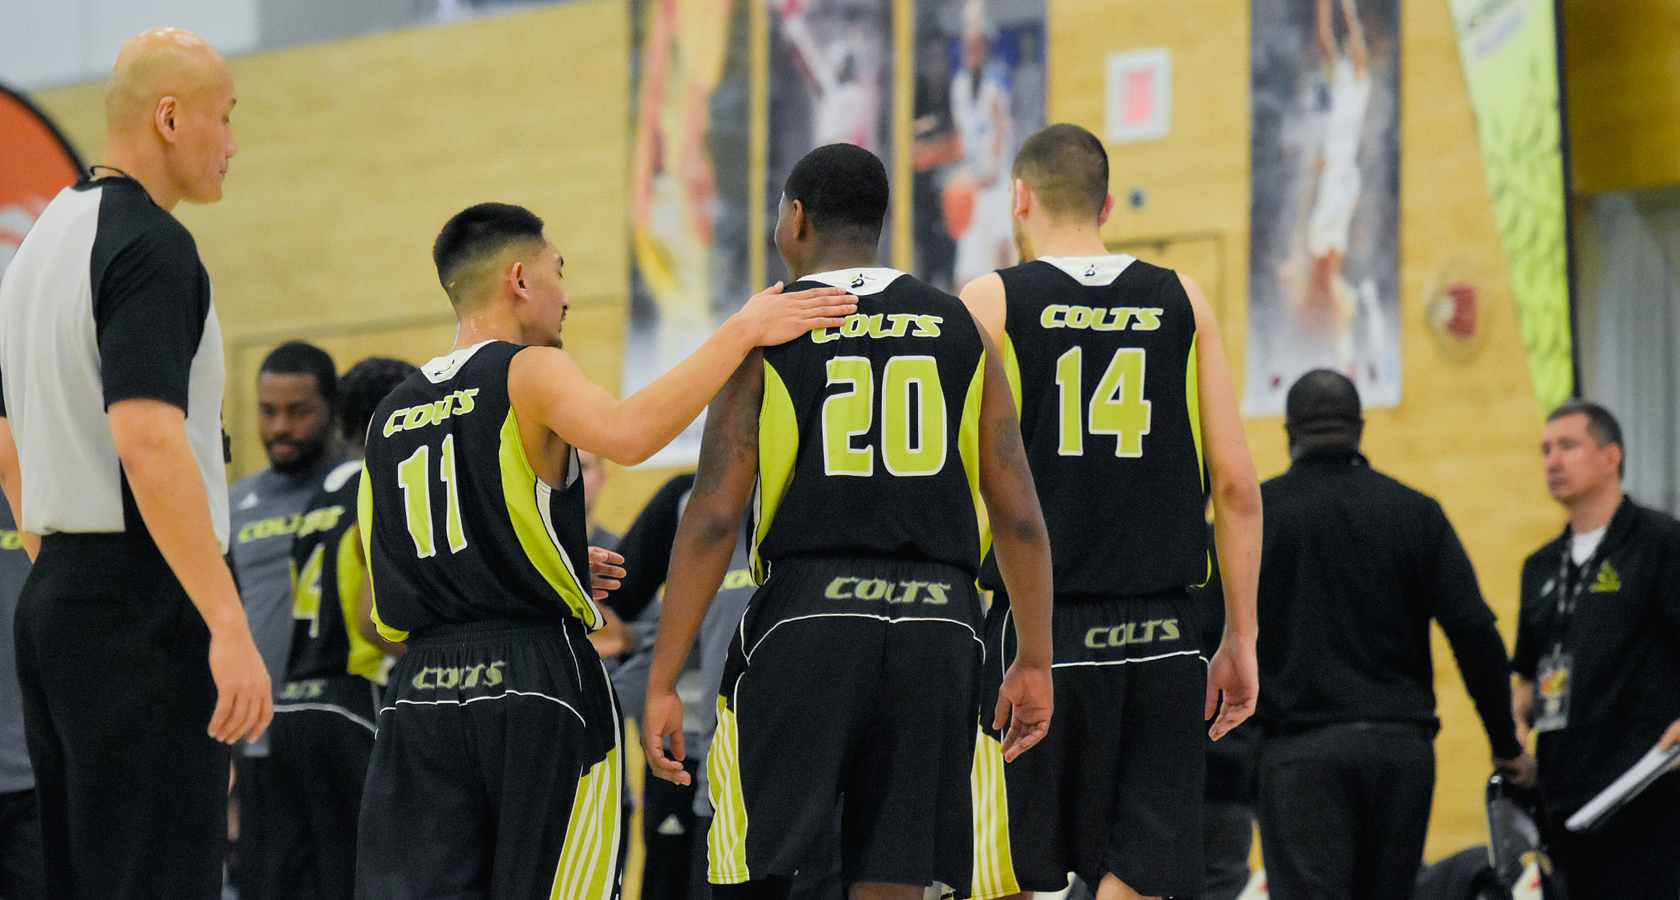 centennial college basketball players patting each other on the back during a game